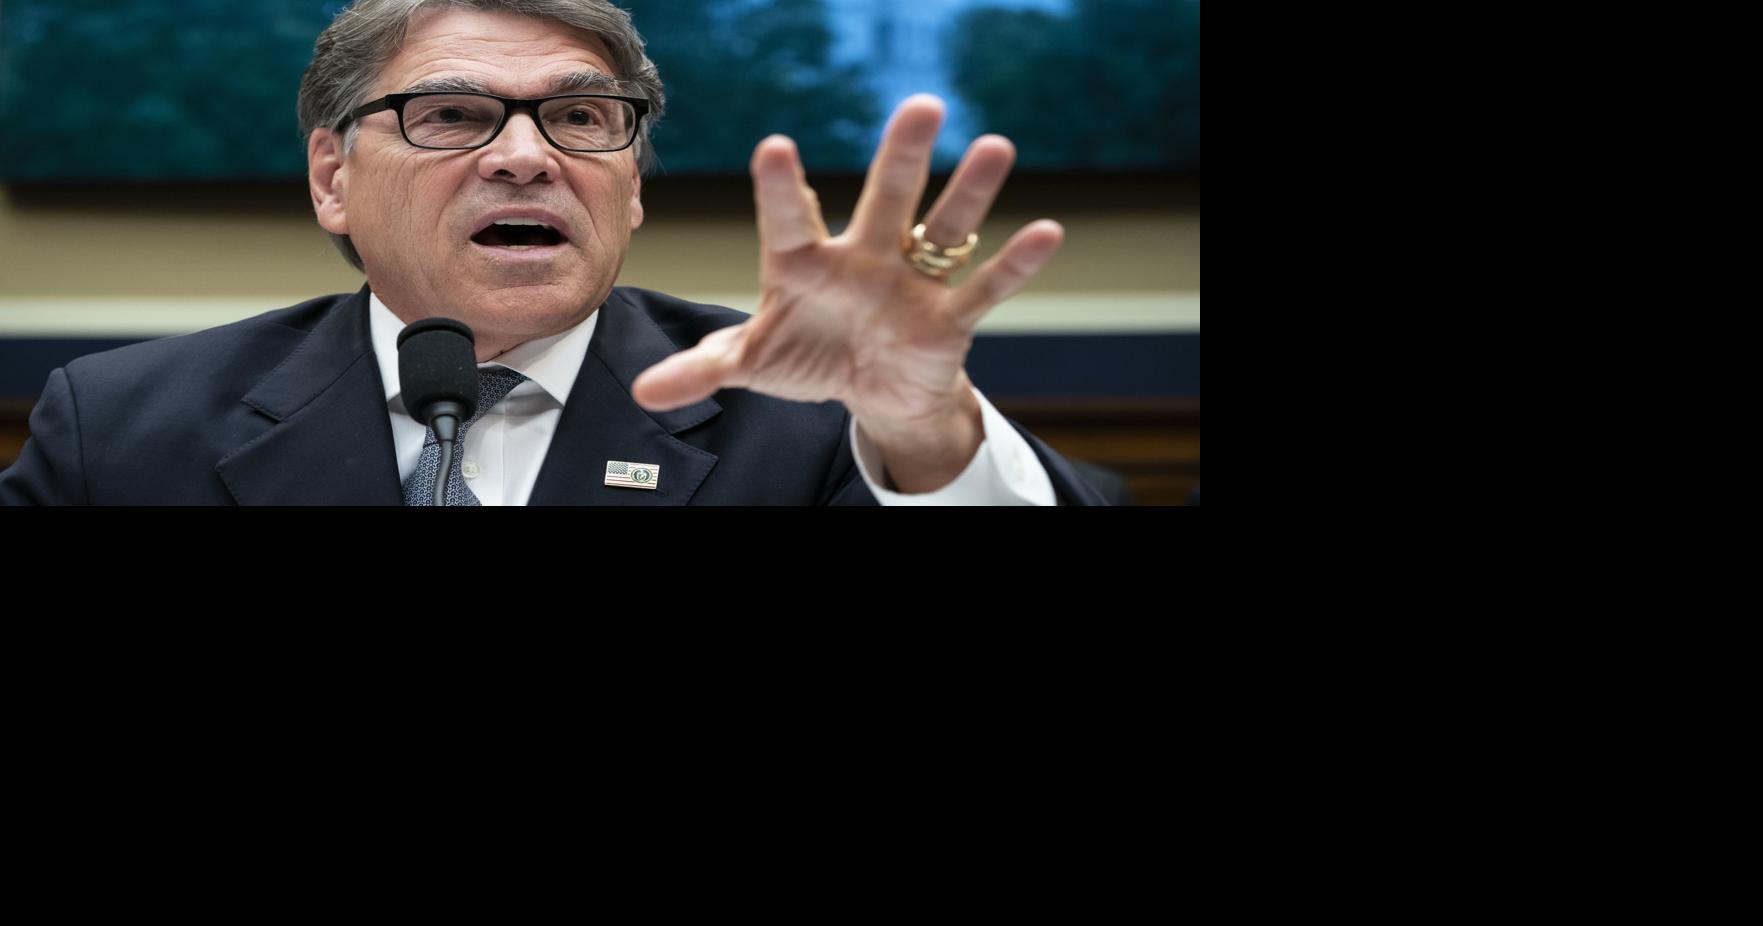 Rick Perry formally named as energy secretary in Trump Cabinet